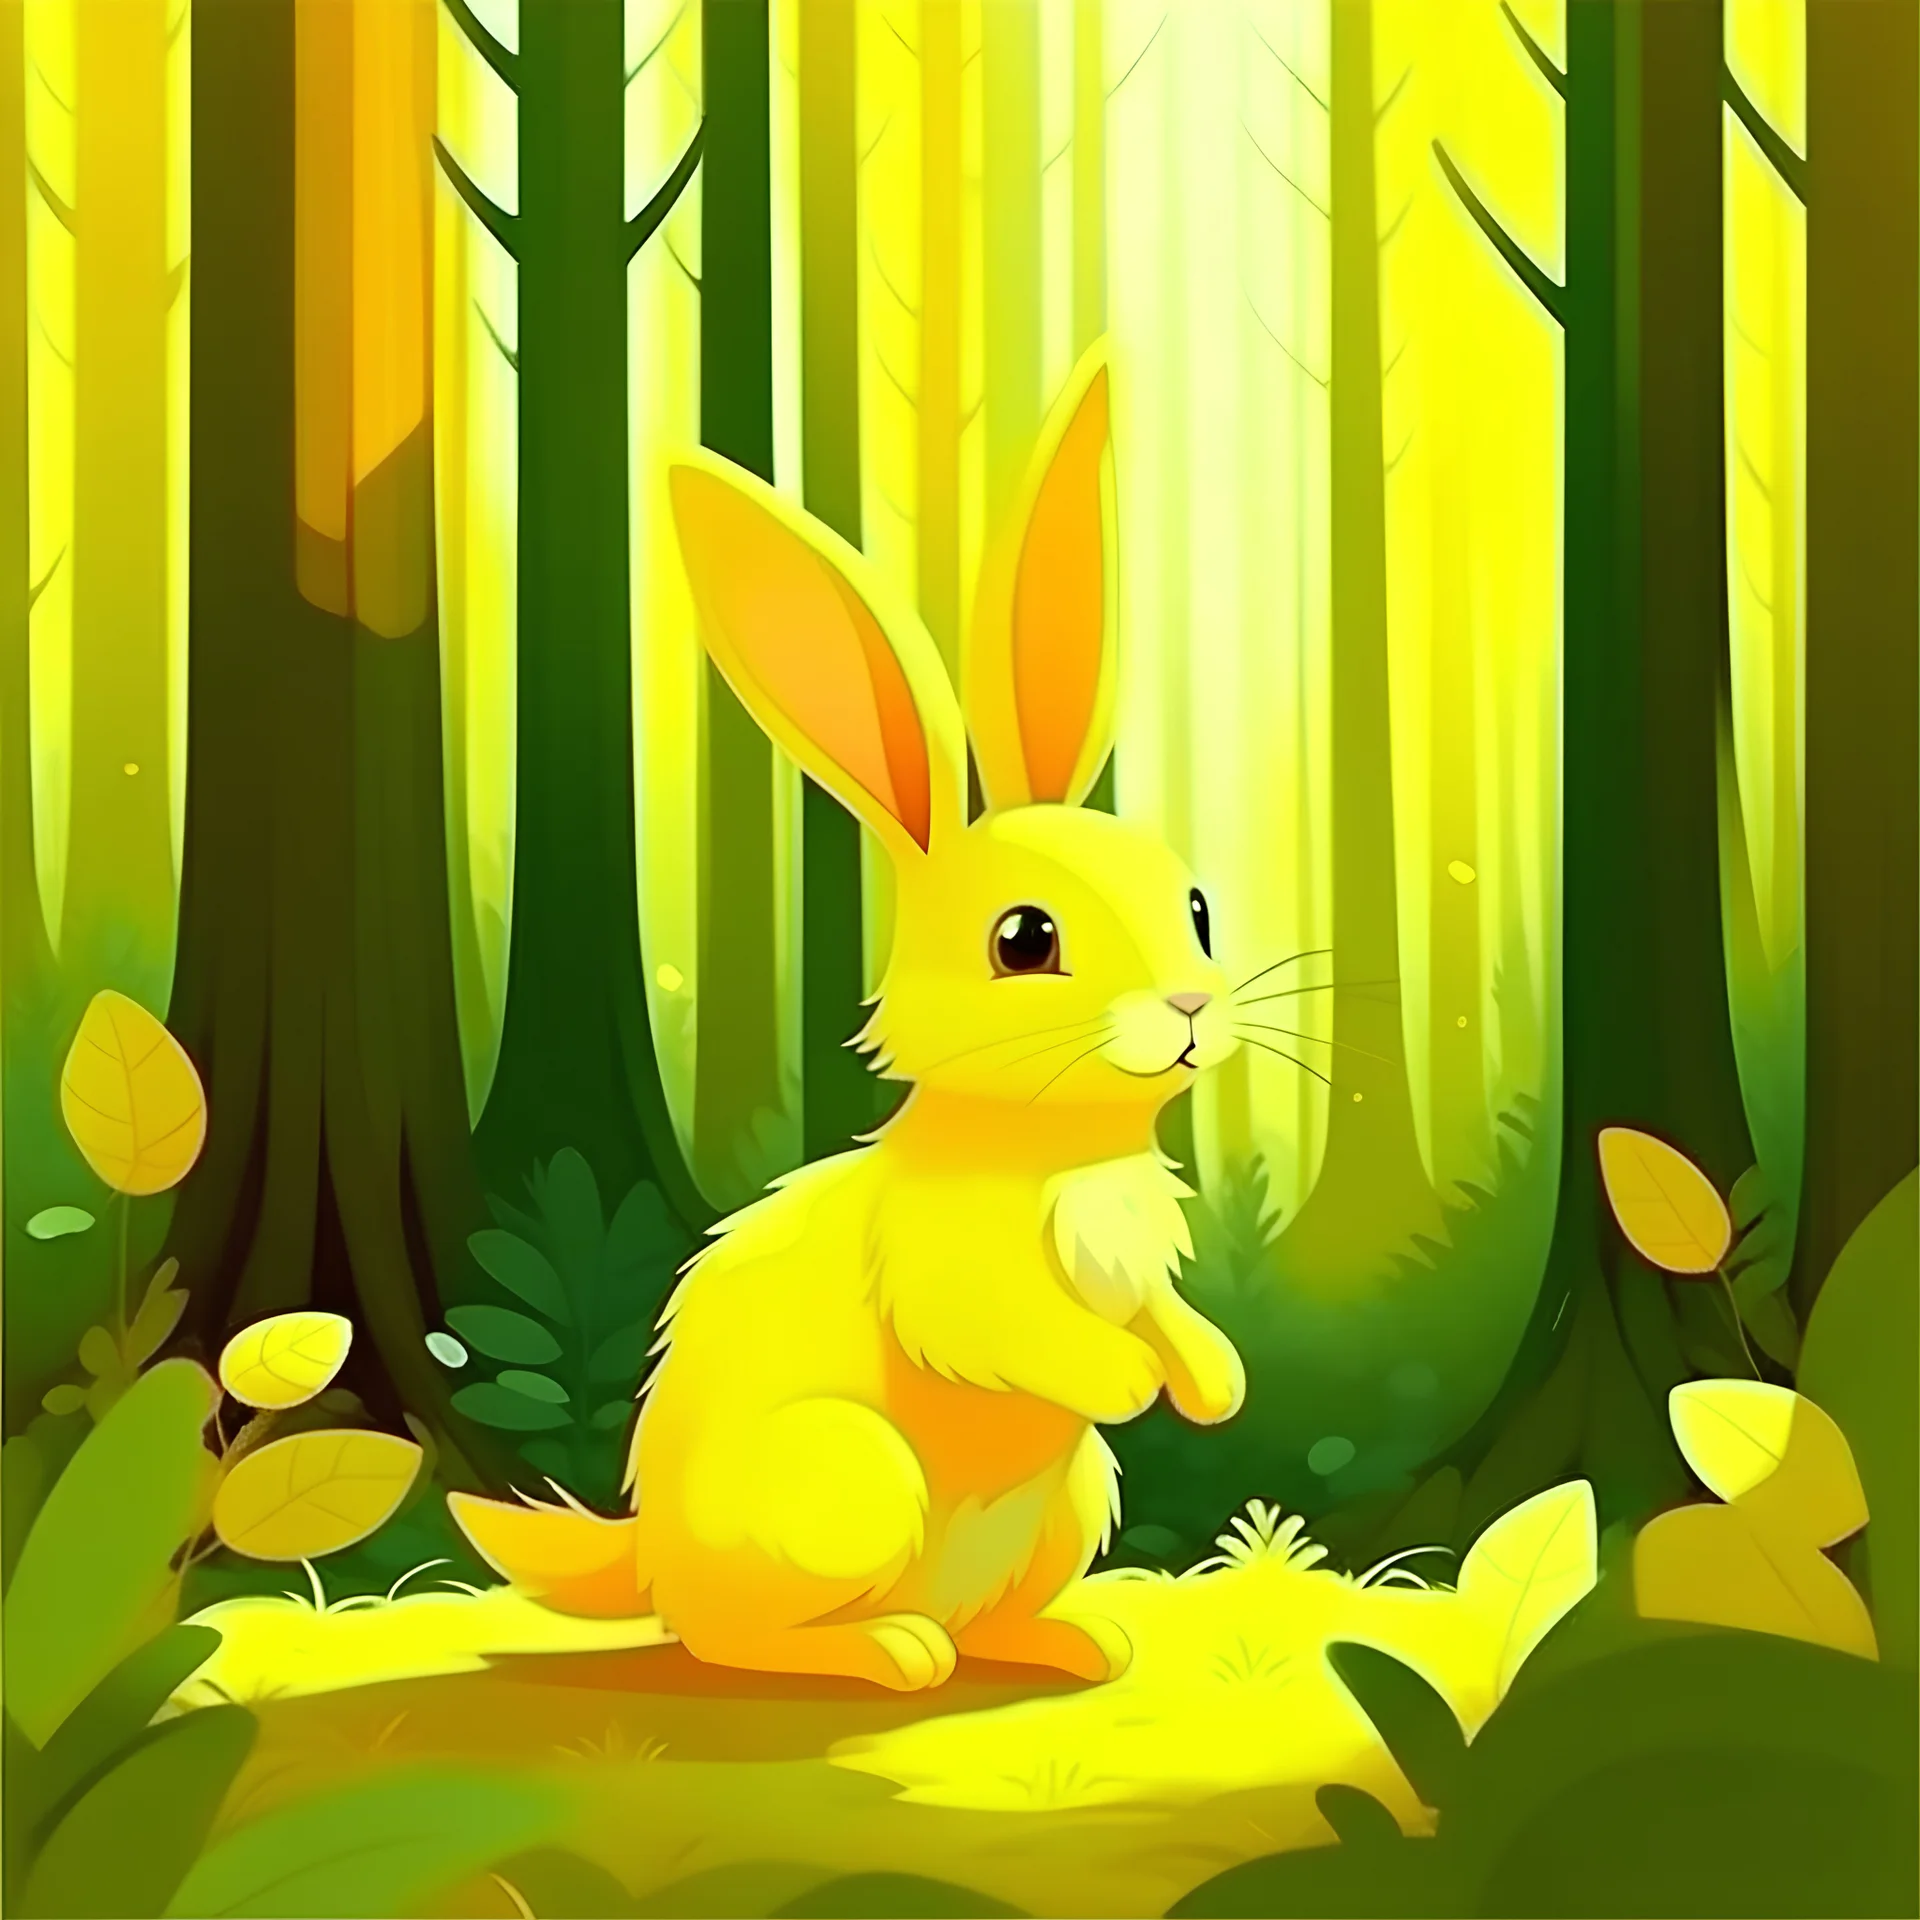 a yellow rabbit in the forest